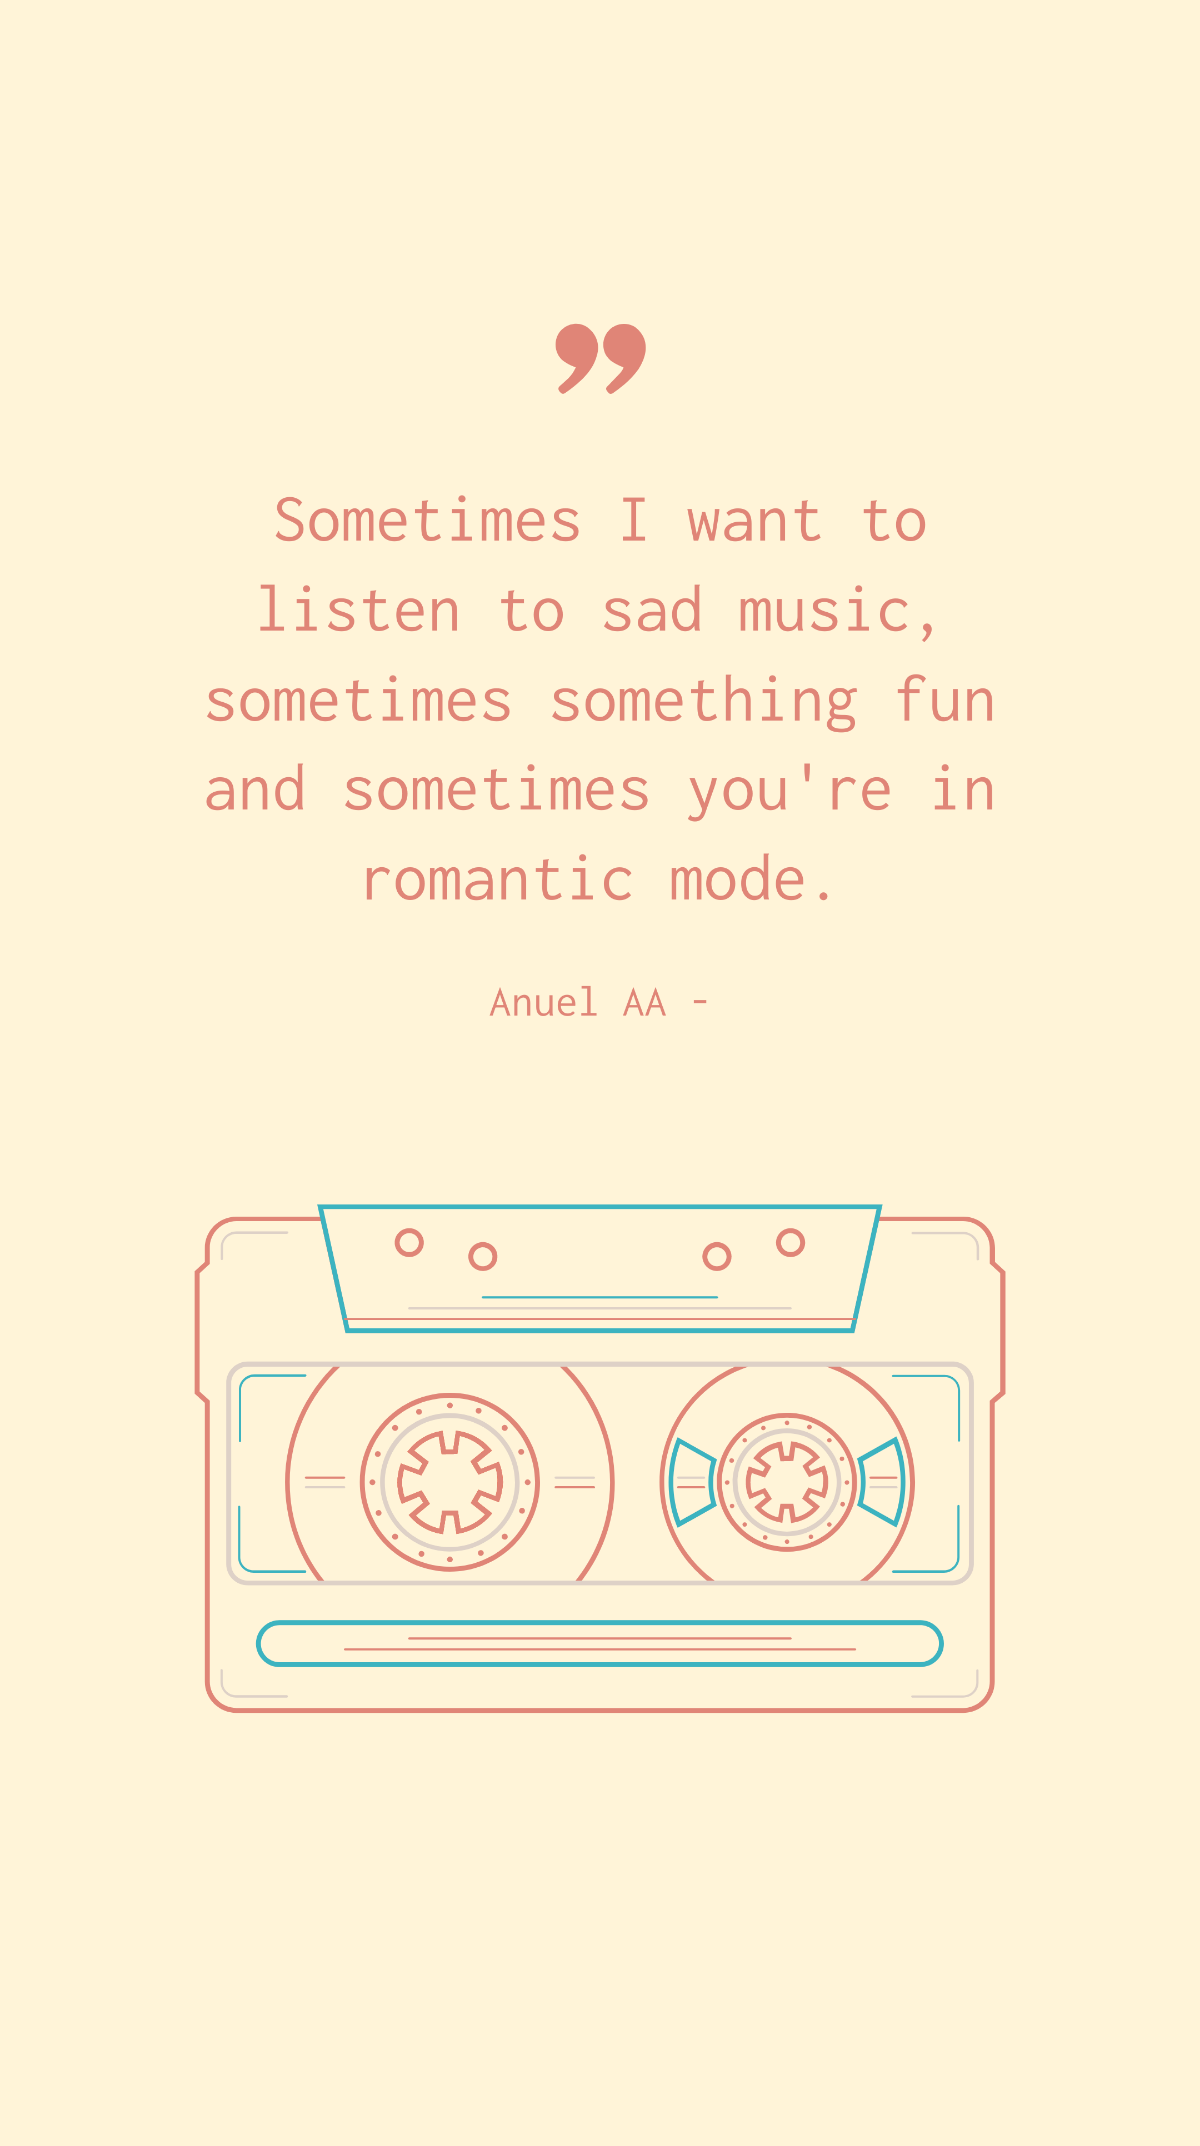 Anuel AA - Sometimes I want to listen to sad music, sometimes something fun and sometimes you're in romantic mode. Template